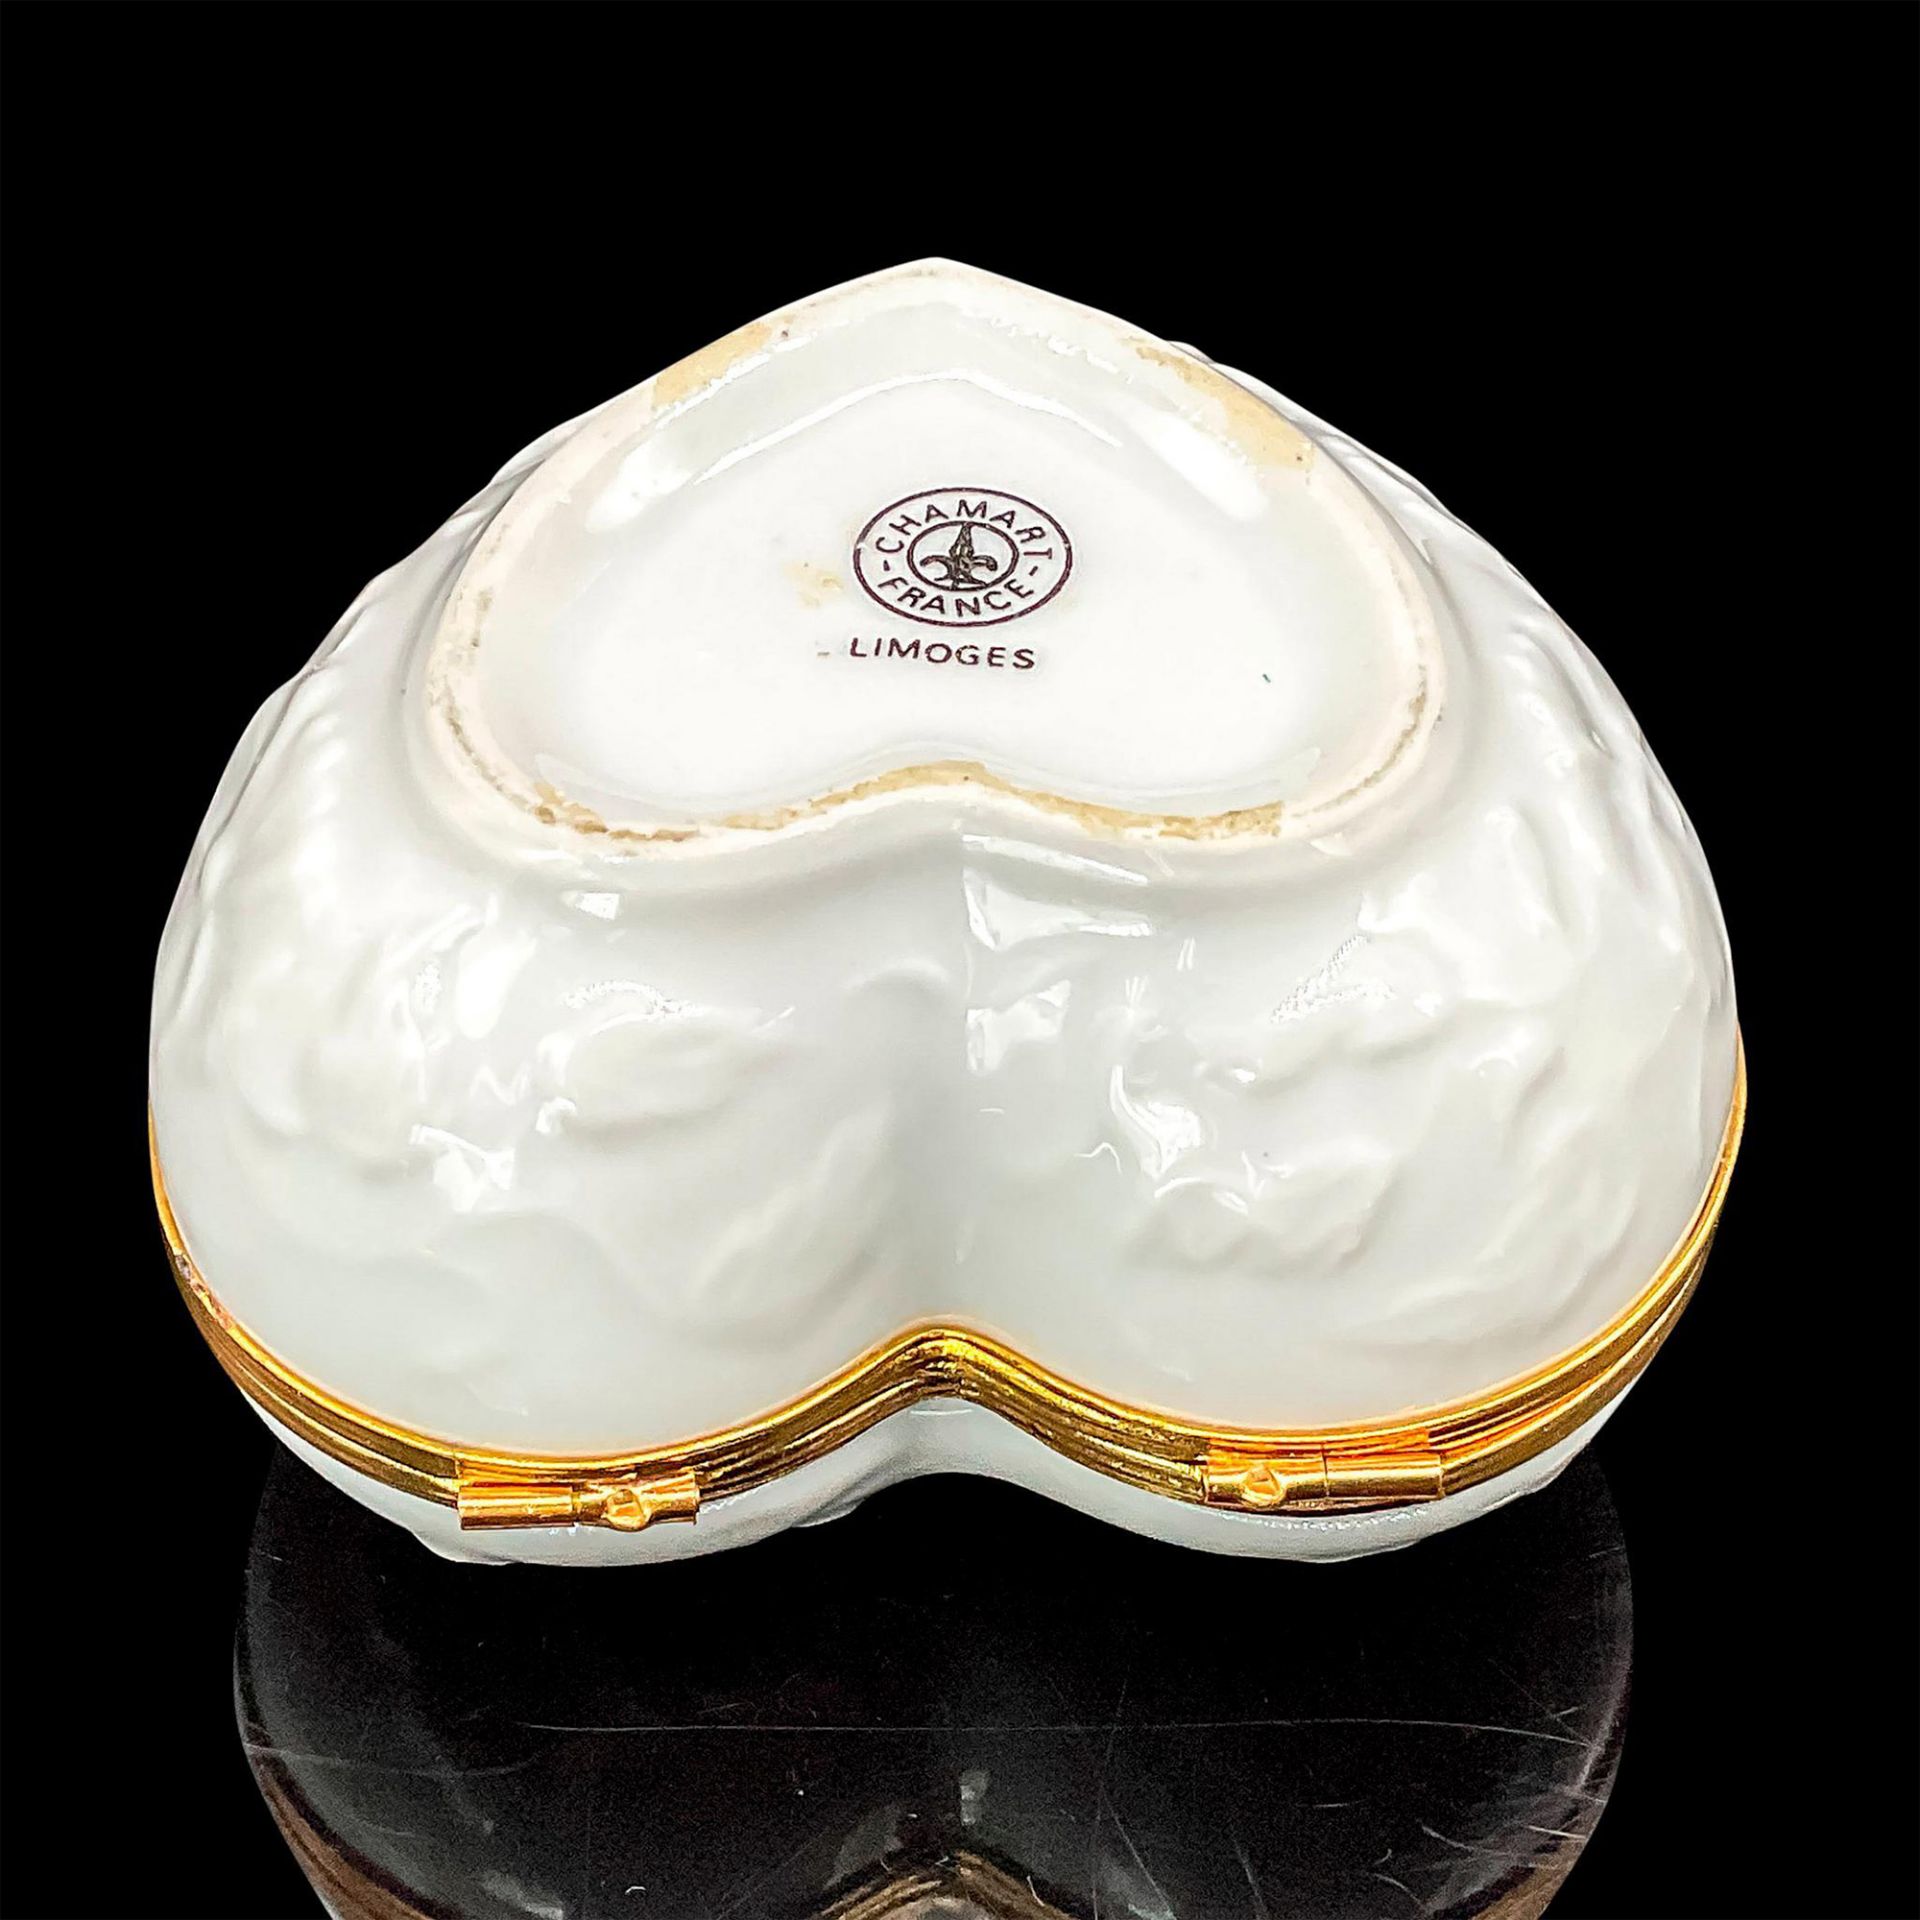 Chamart Limoges Porcelain Heart Box, White and Gold - Image 3 of 3